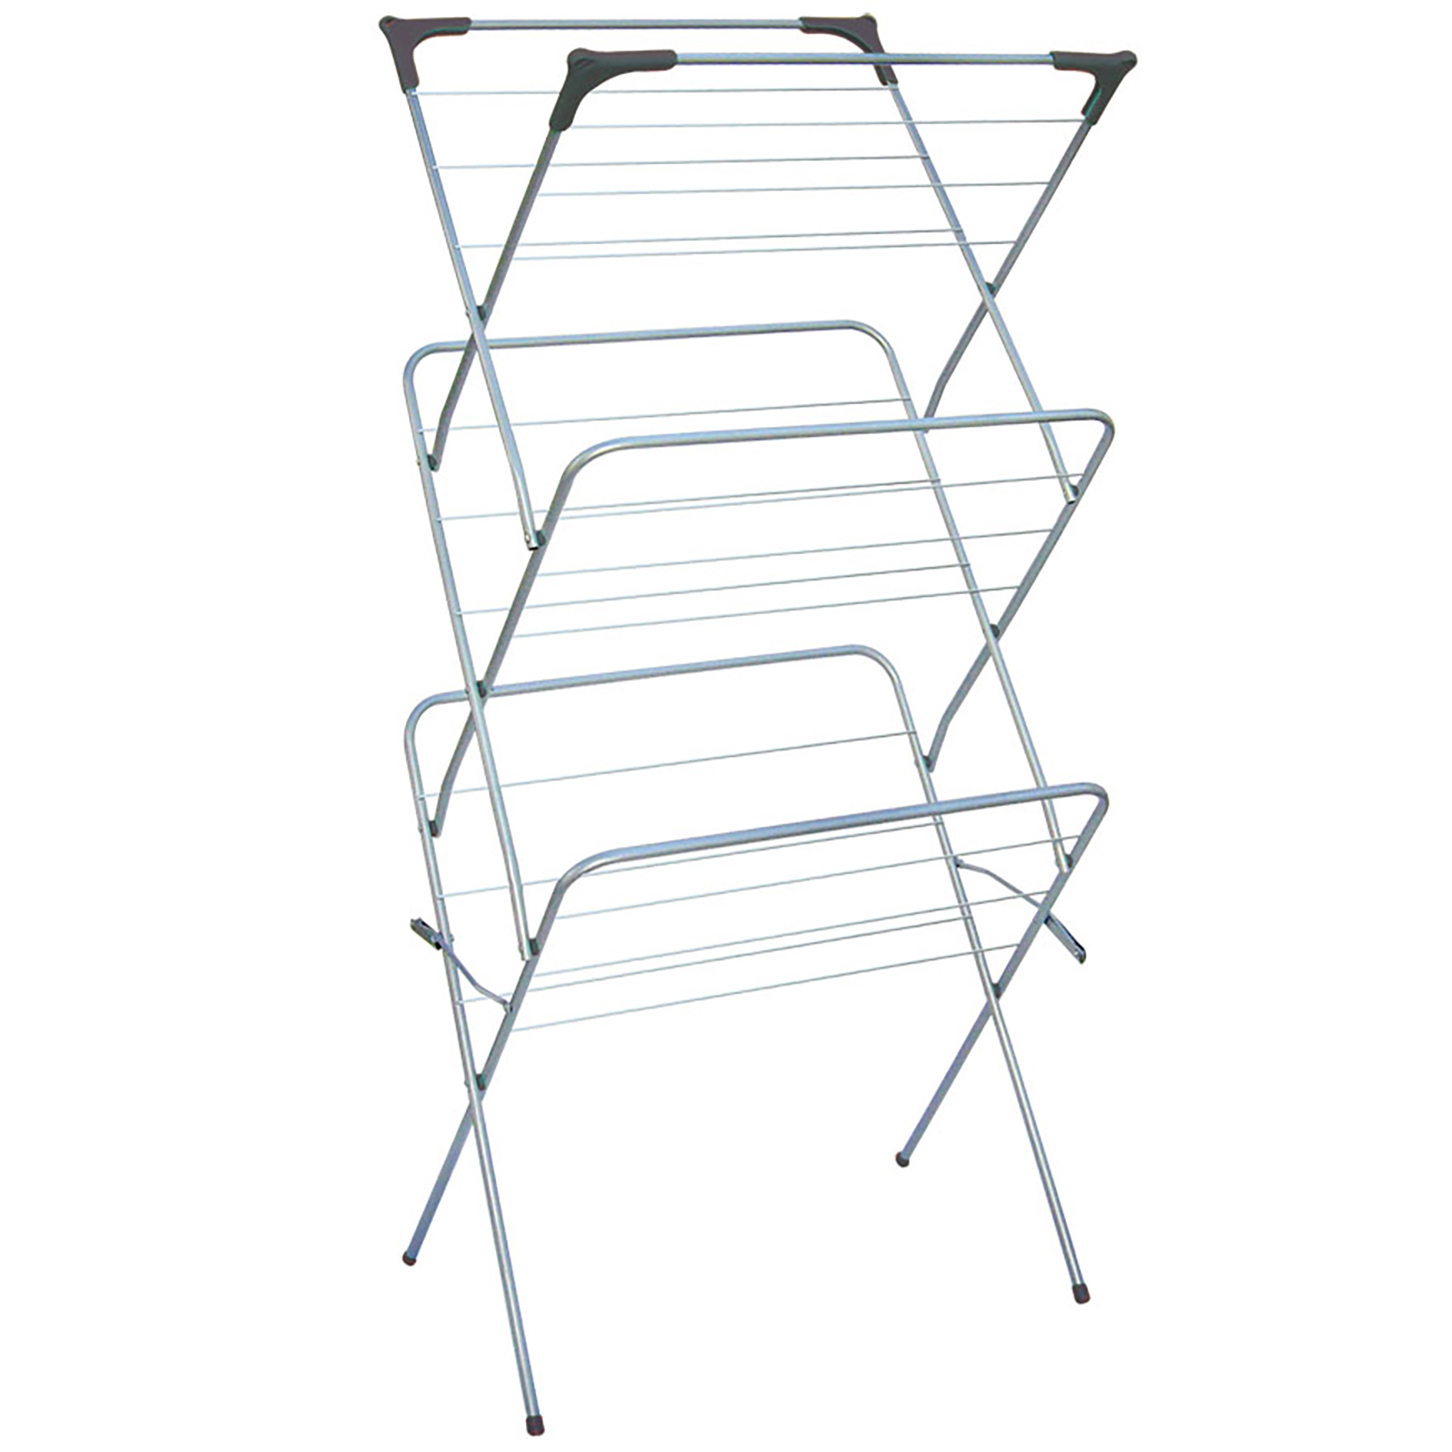 Sunbeam NEW Clothes Dryer 3 Tier Hanging Drying Laundry Rack CD10346 